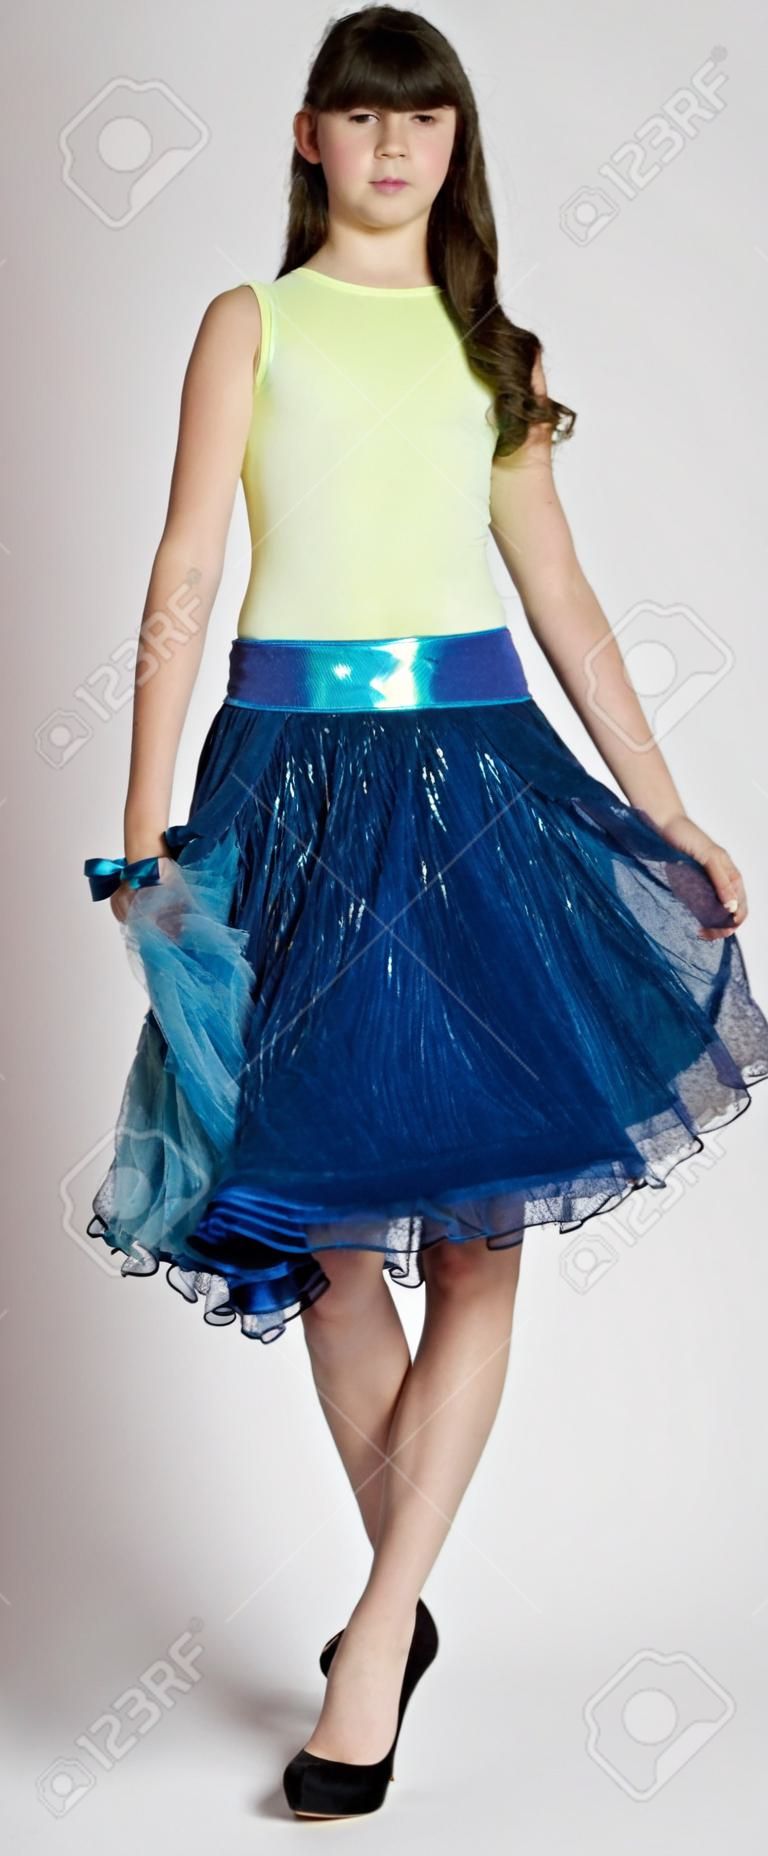 Teen Girl in a Skirt and Heels Against a White Studio Background